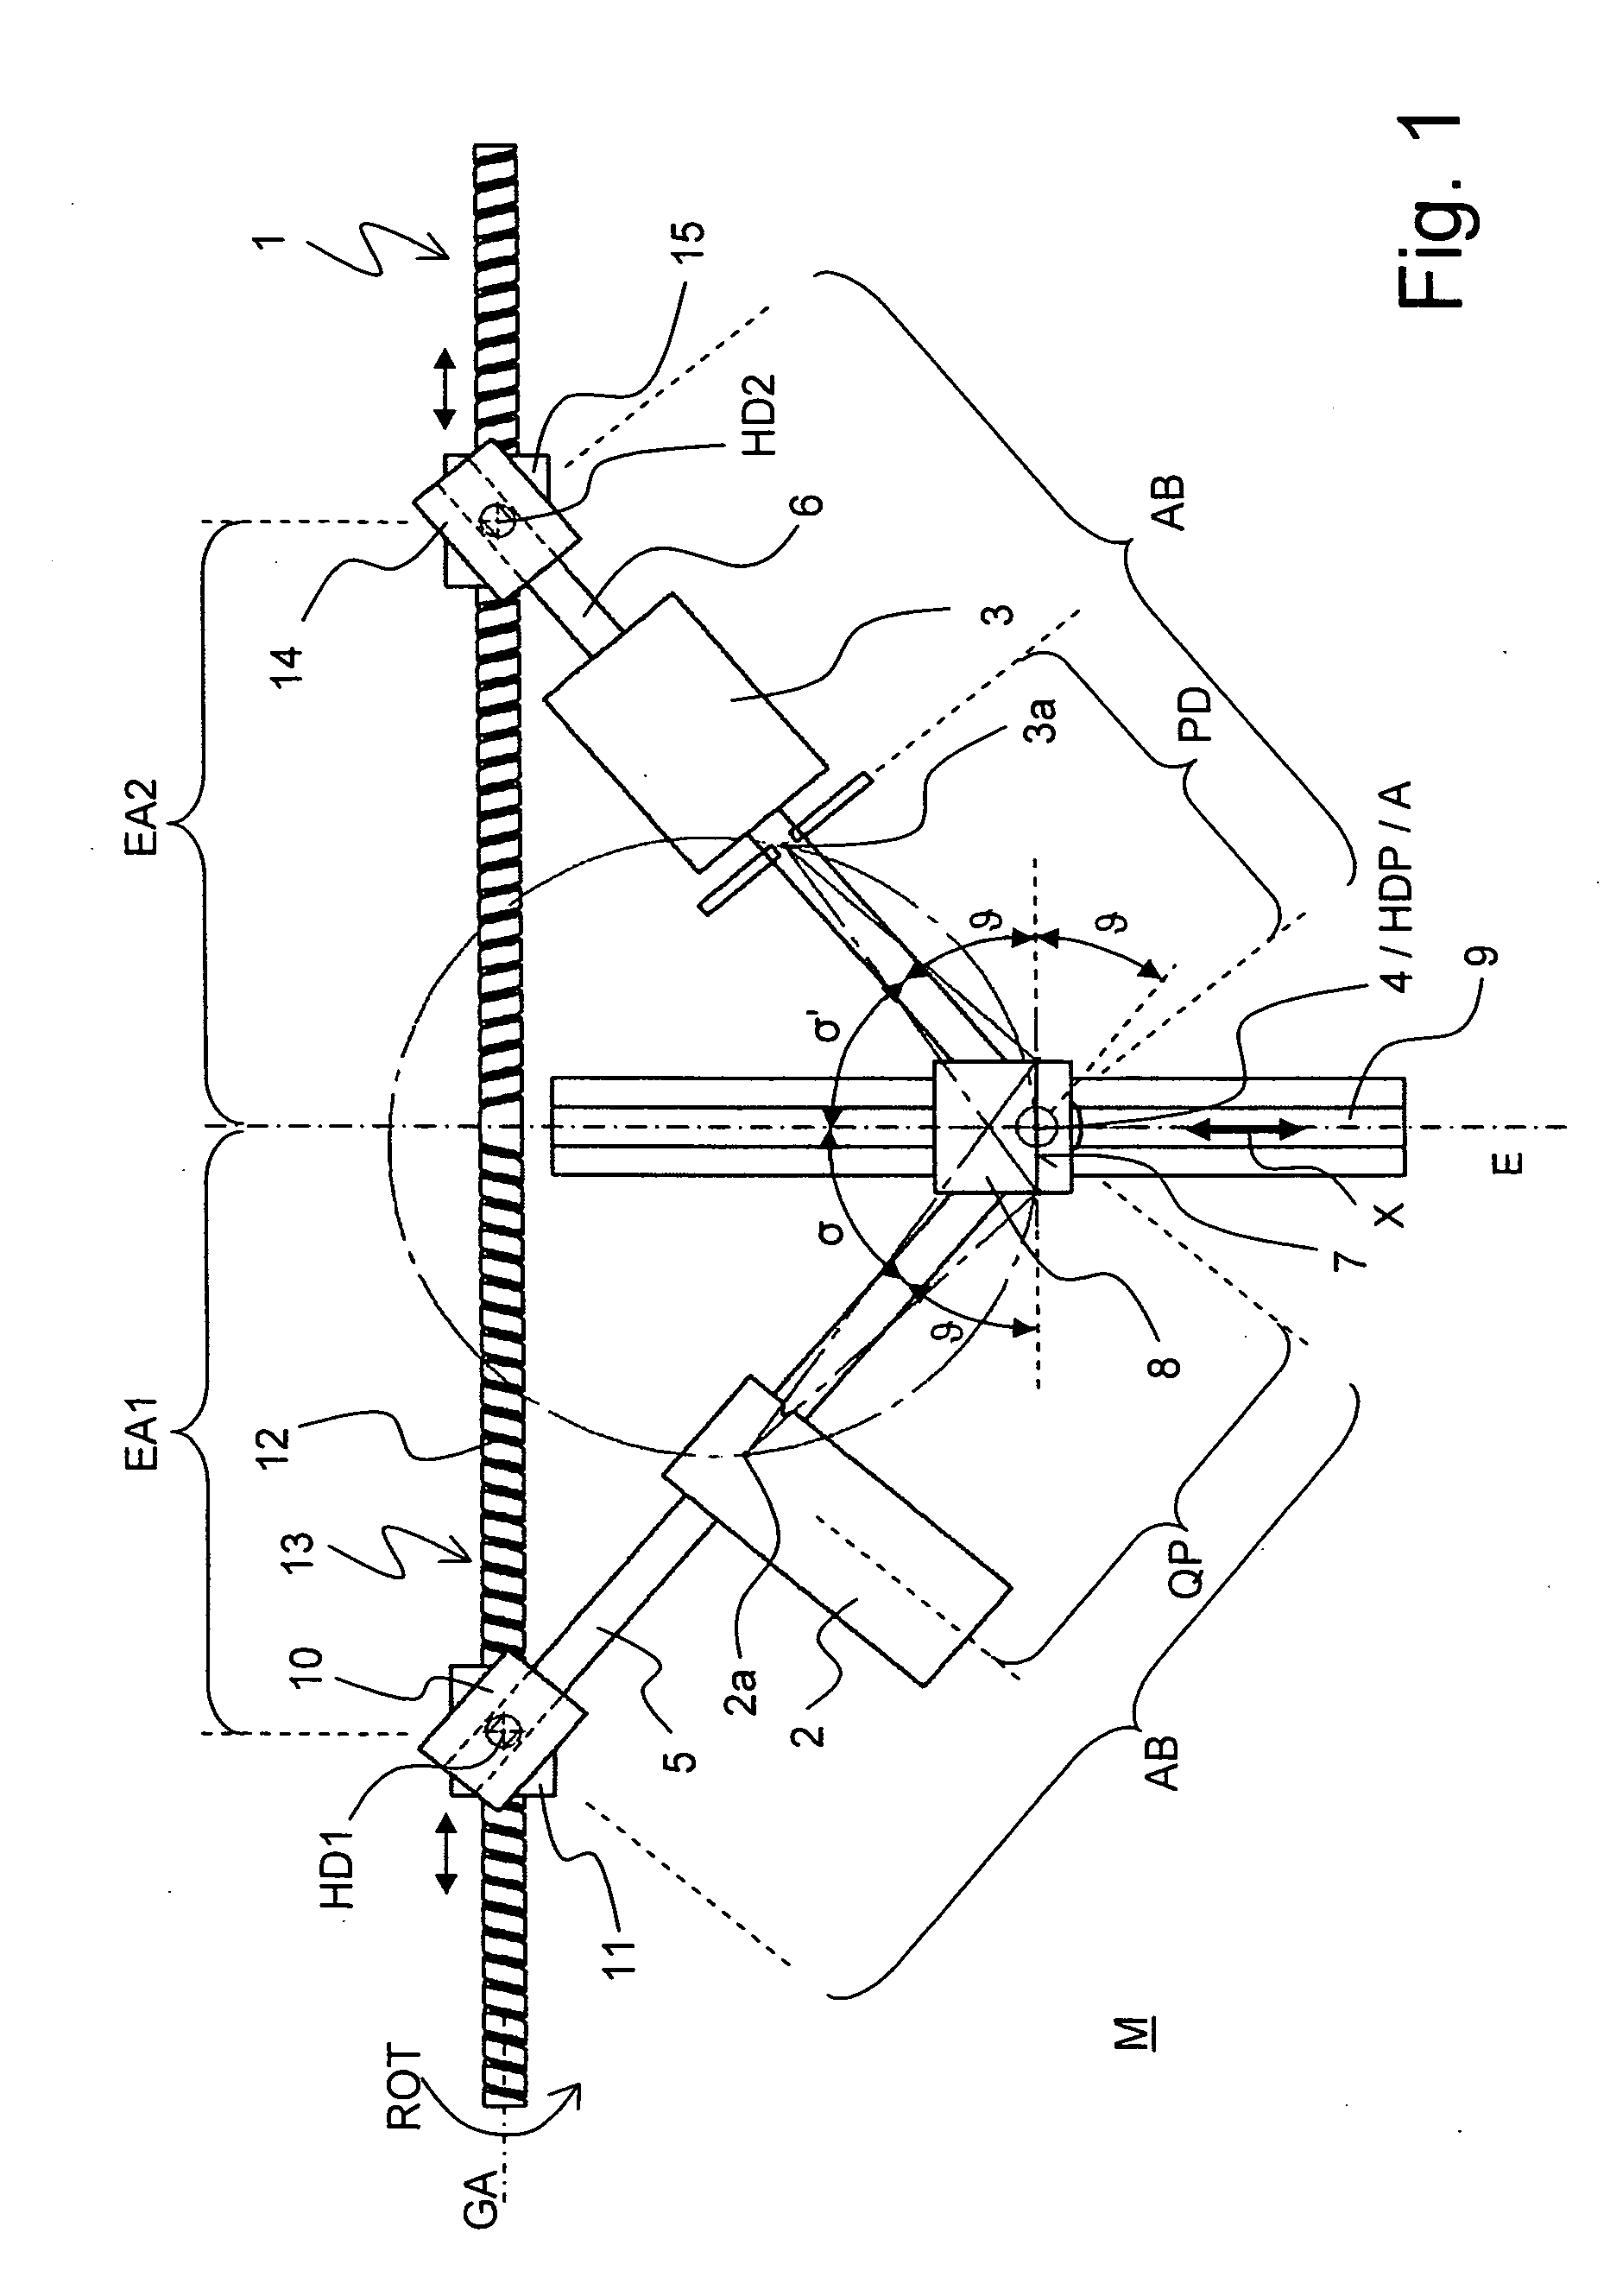 X-ray diffractometer for mechanically correlated movement of the source, detector, and sample position